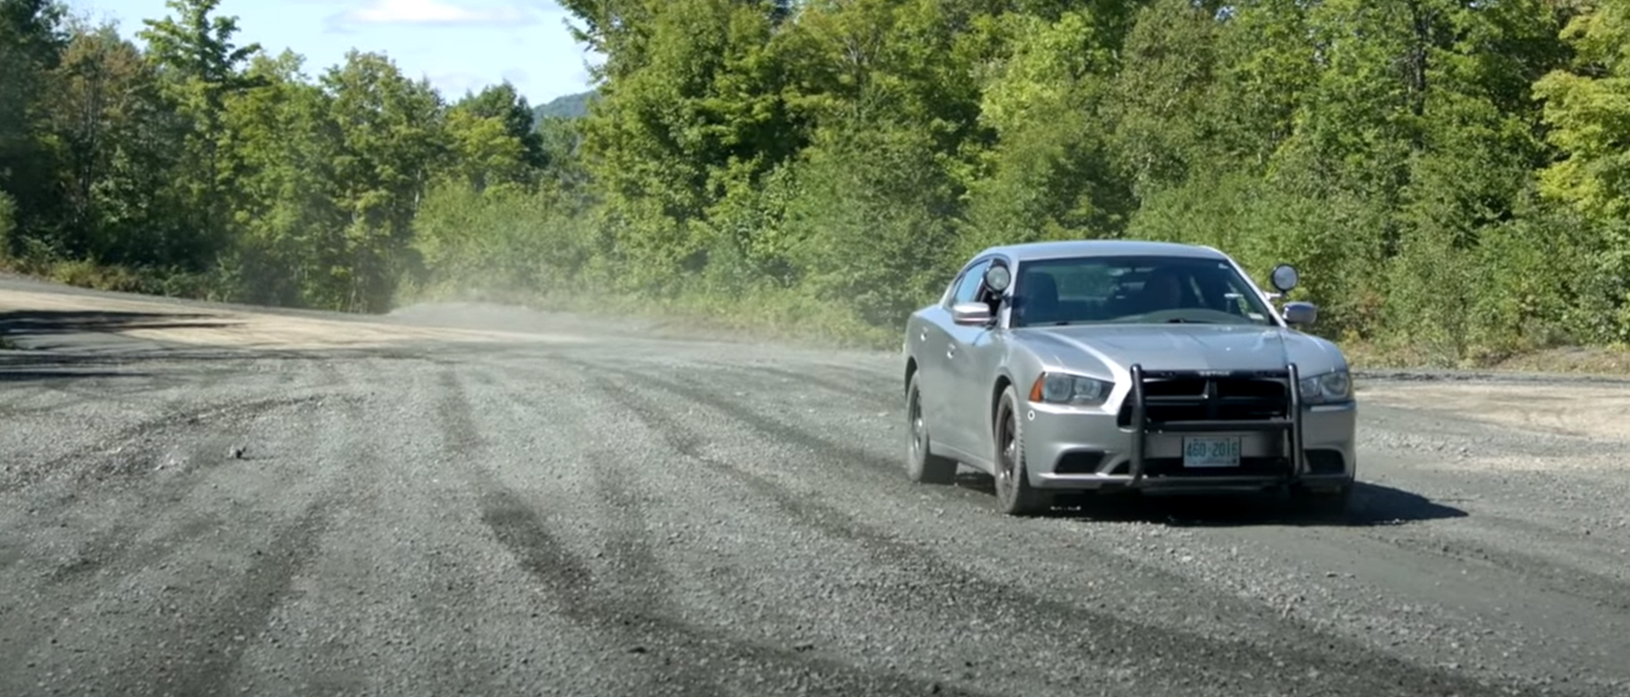 2013 dodge charger police pursuit on a gravel road